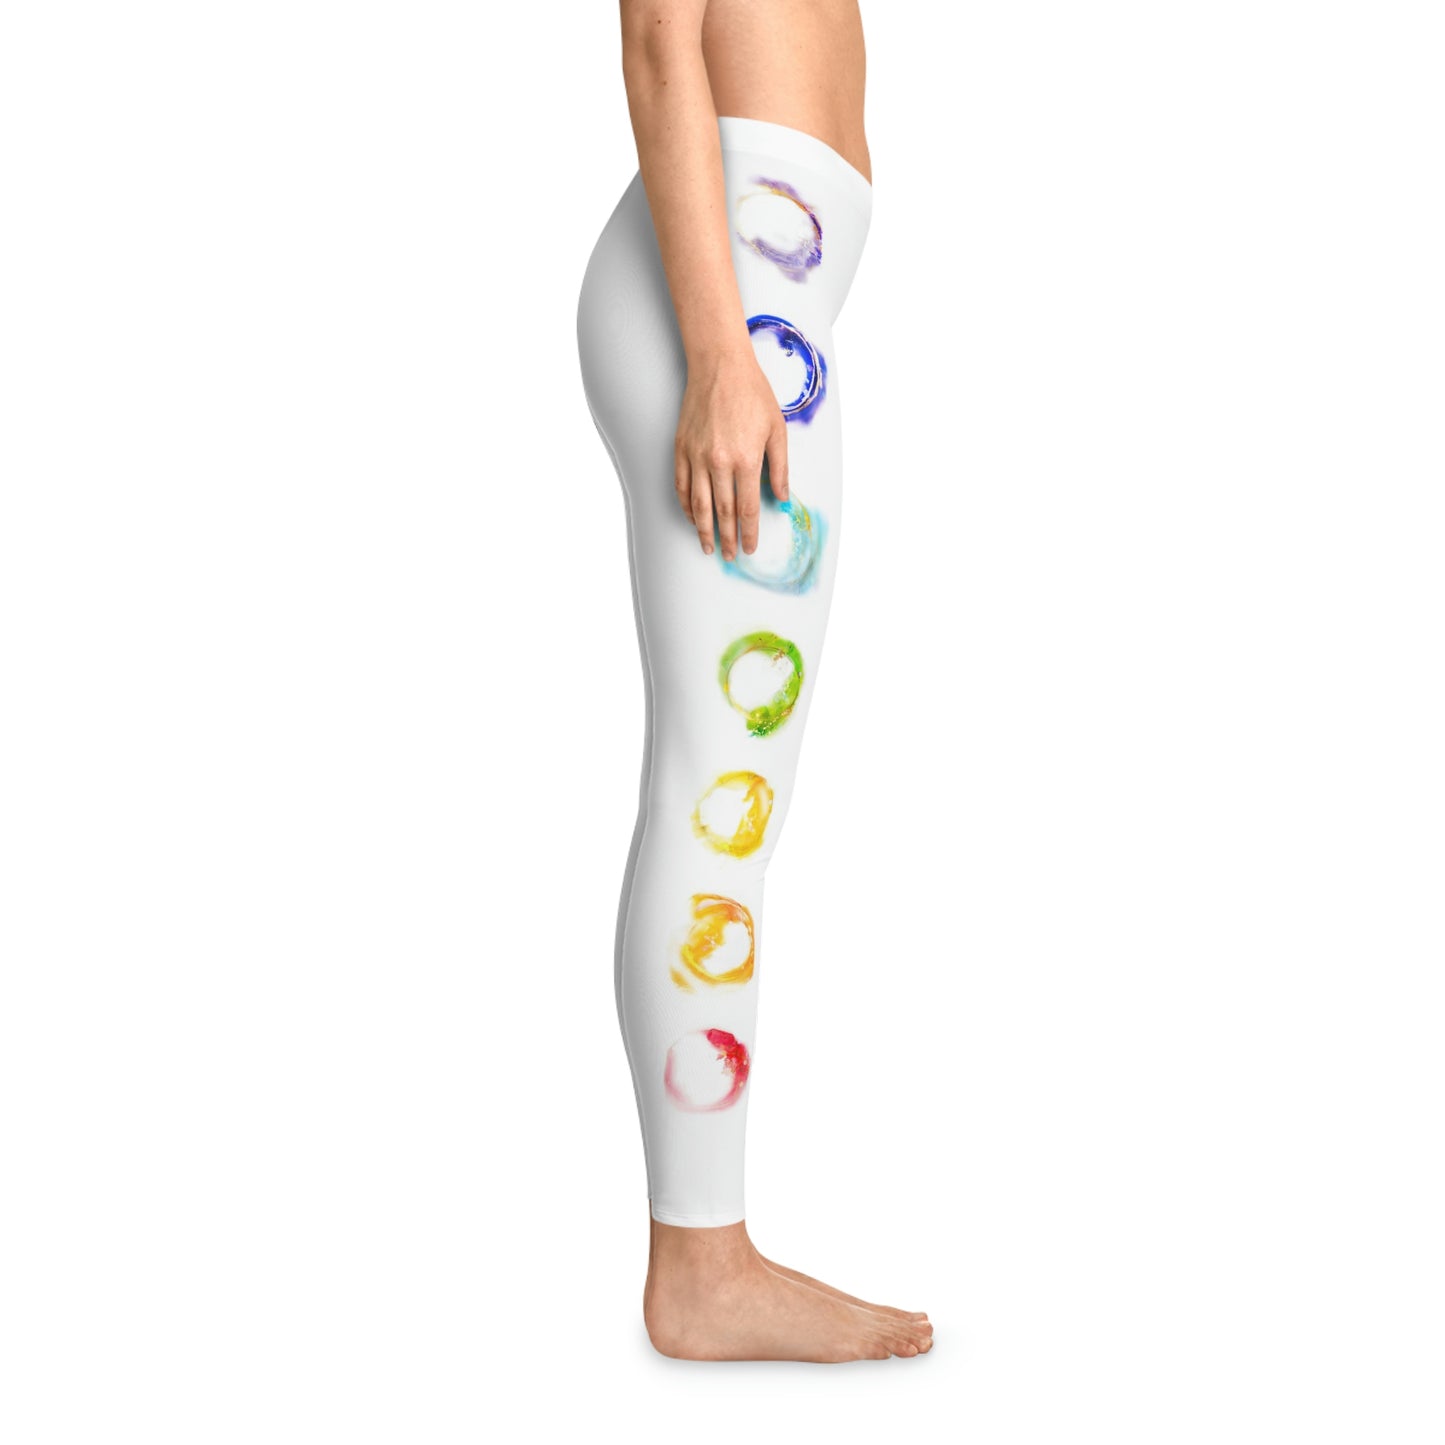 Stretchy Leggings - Chakras Collection